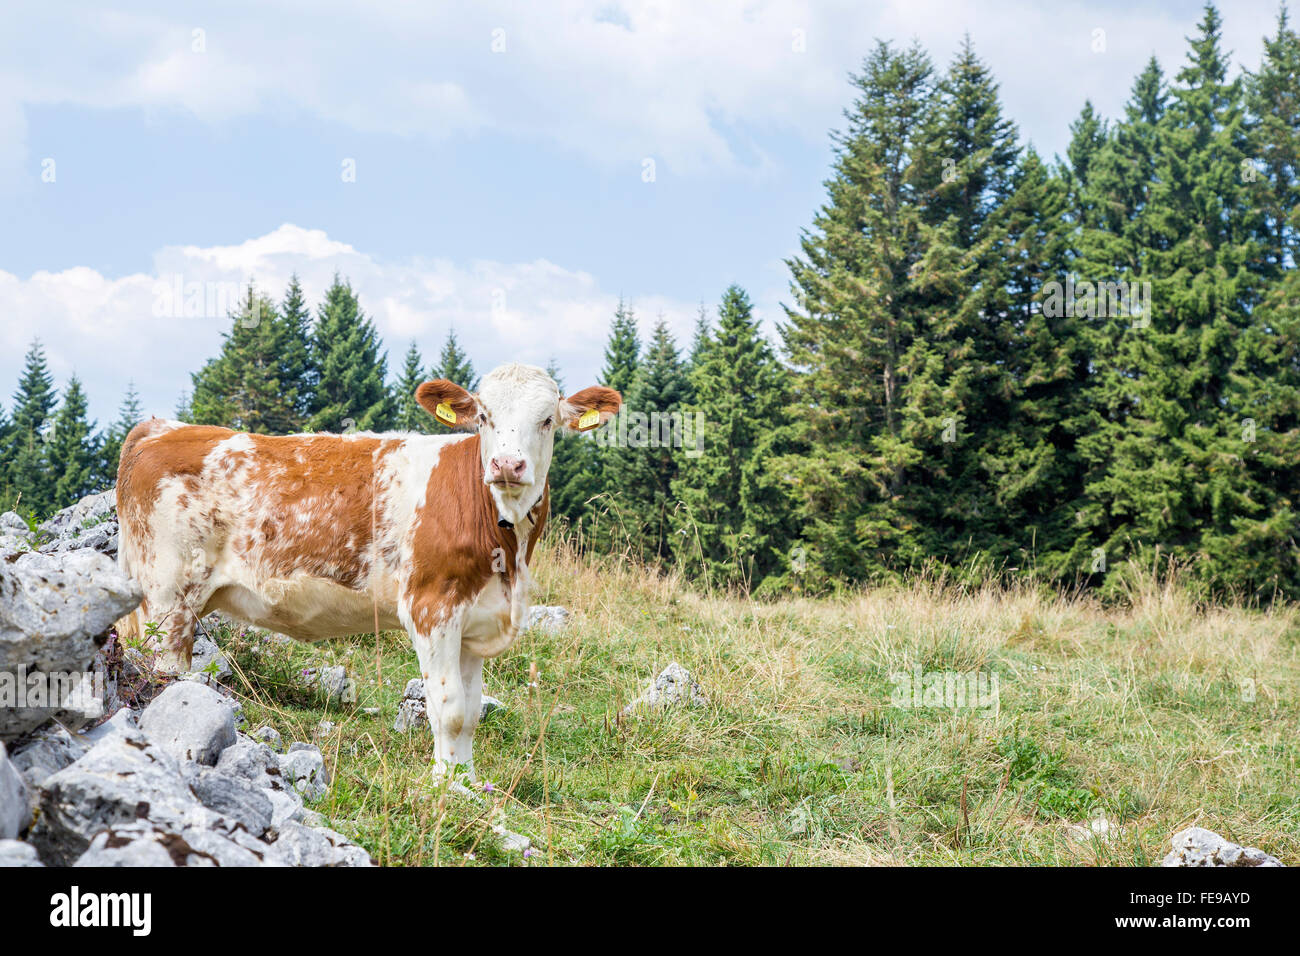 A calf standing and looking at the camera on an mountain pasture Stock Photo